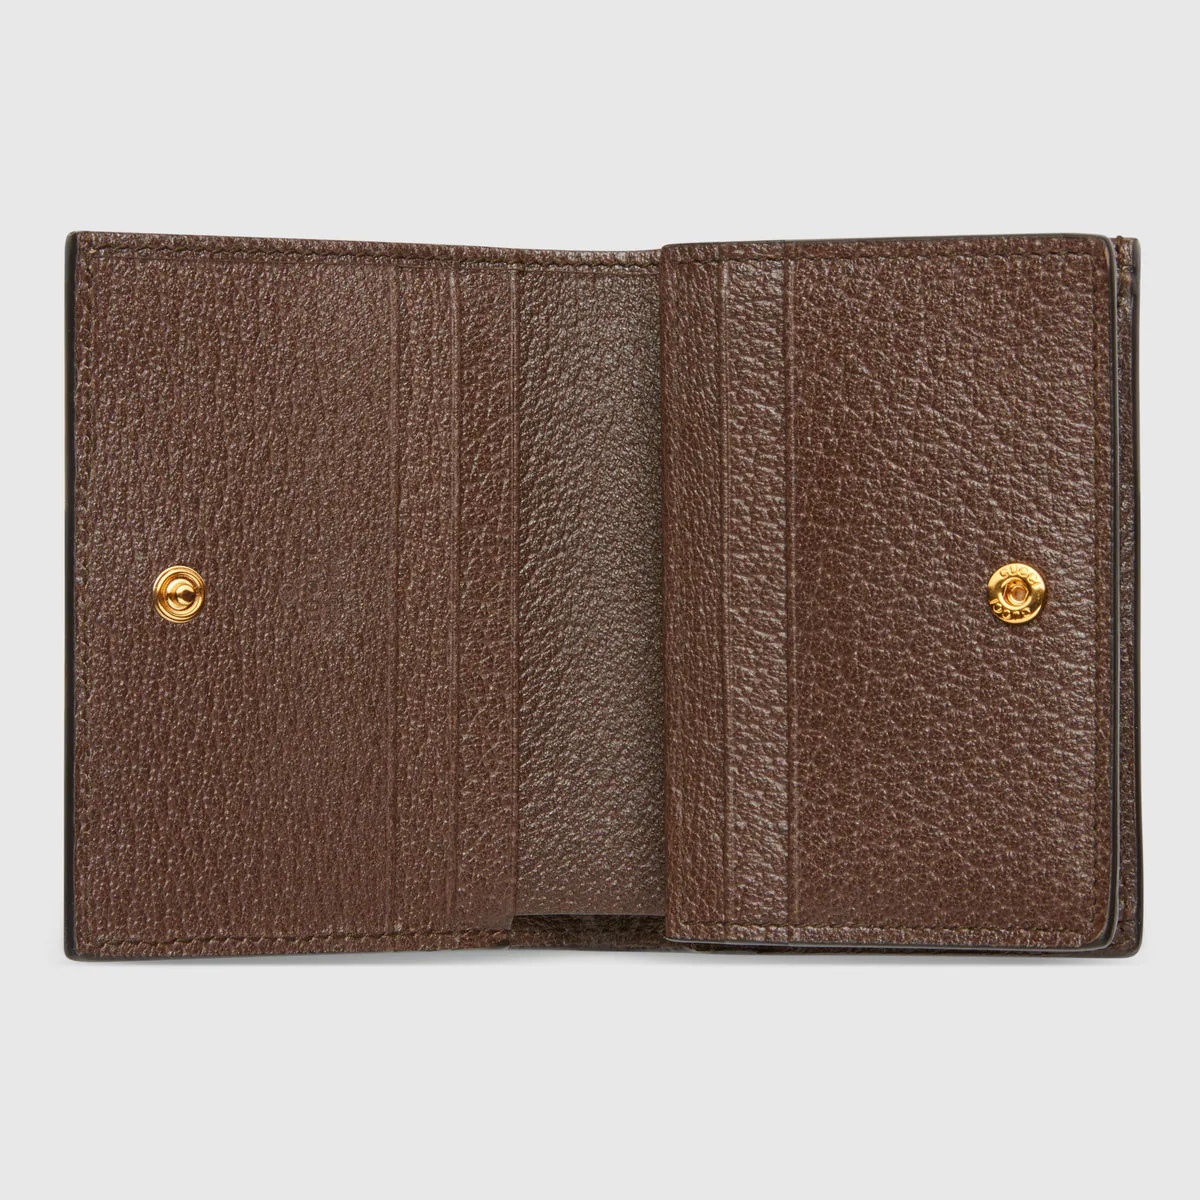 Ophidia GG card case wallet - 2